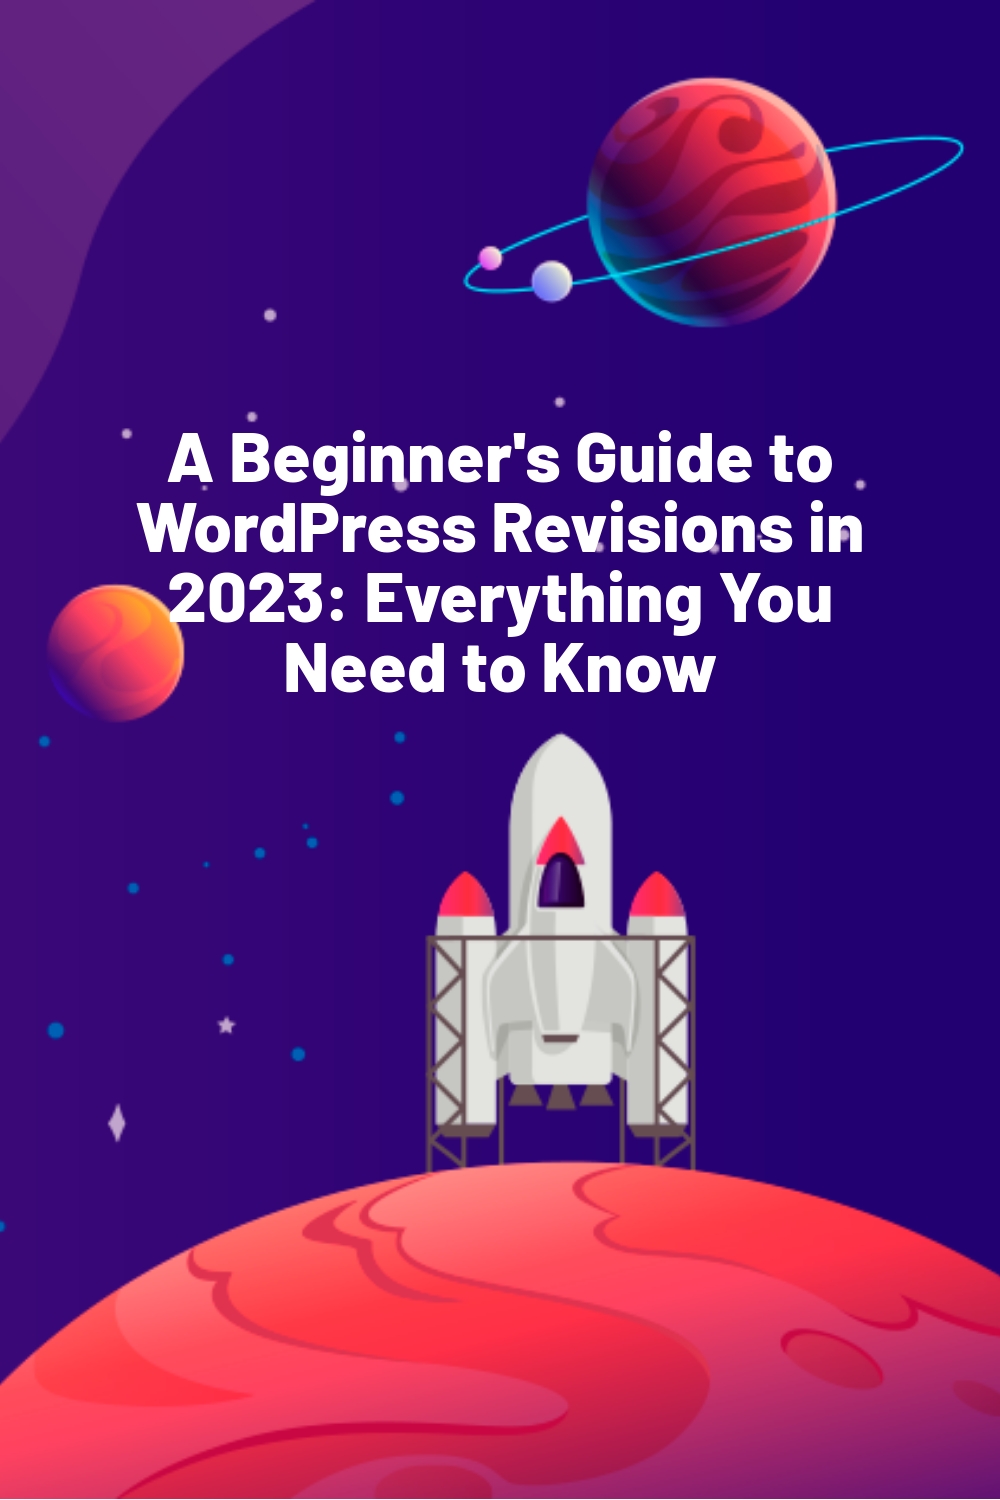 A Beginner’s Guide to WordPress Revisions in 2023: Everything You Need to Know